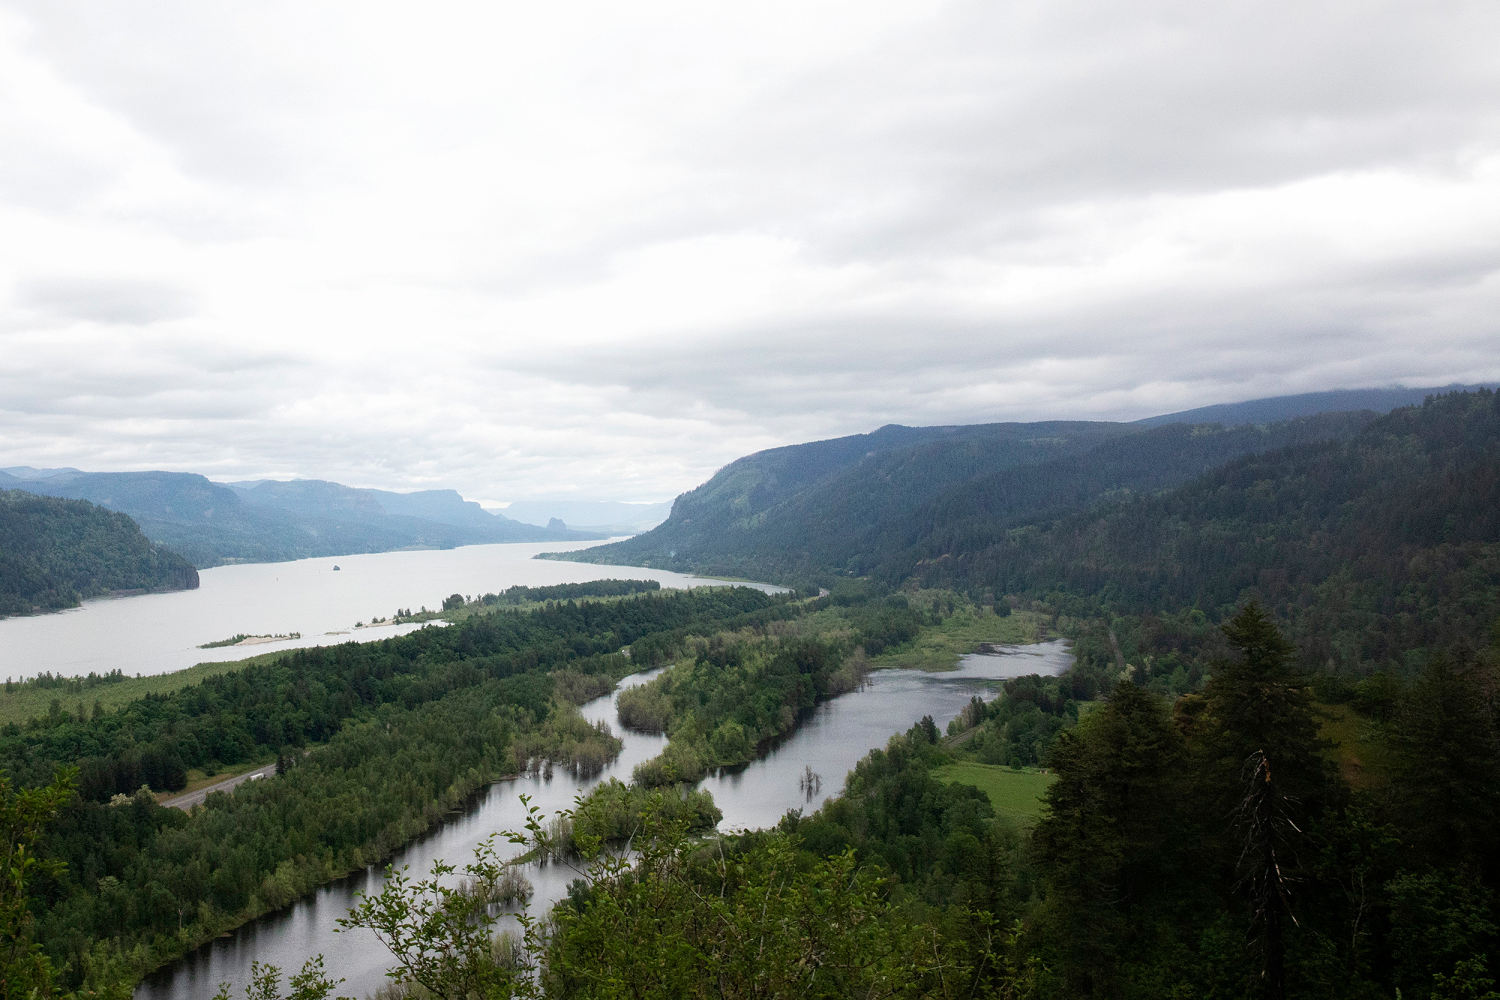 Hiker dies after falling from trail in Oregon’s Columbia River Gorge, officials say